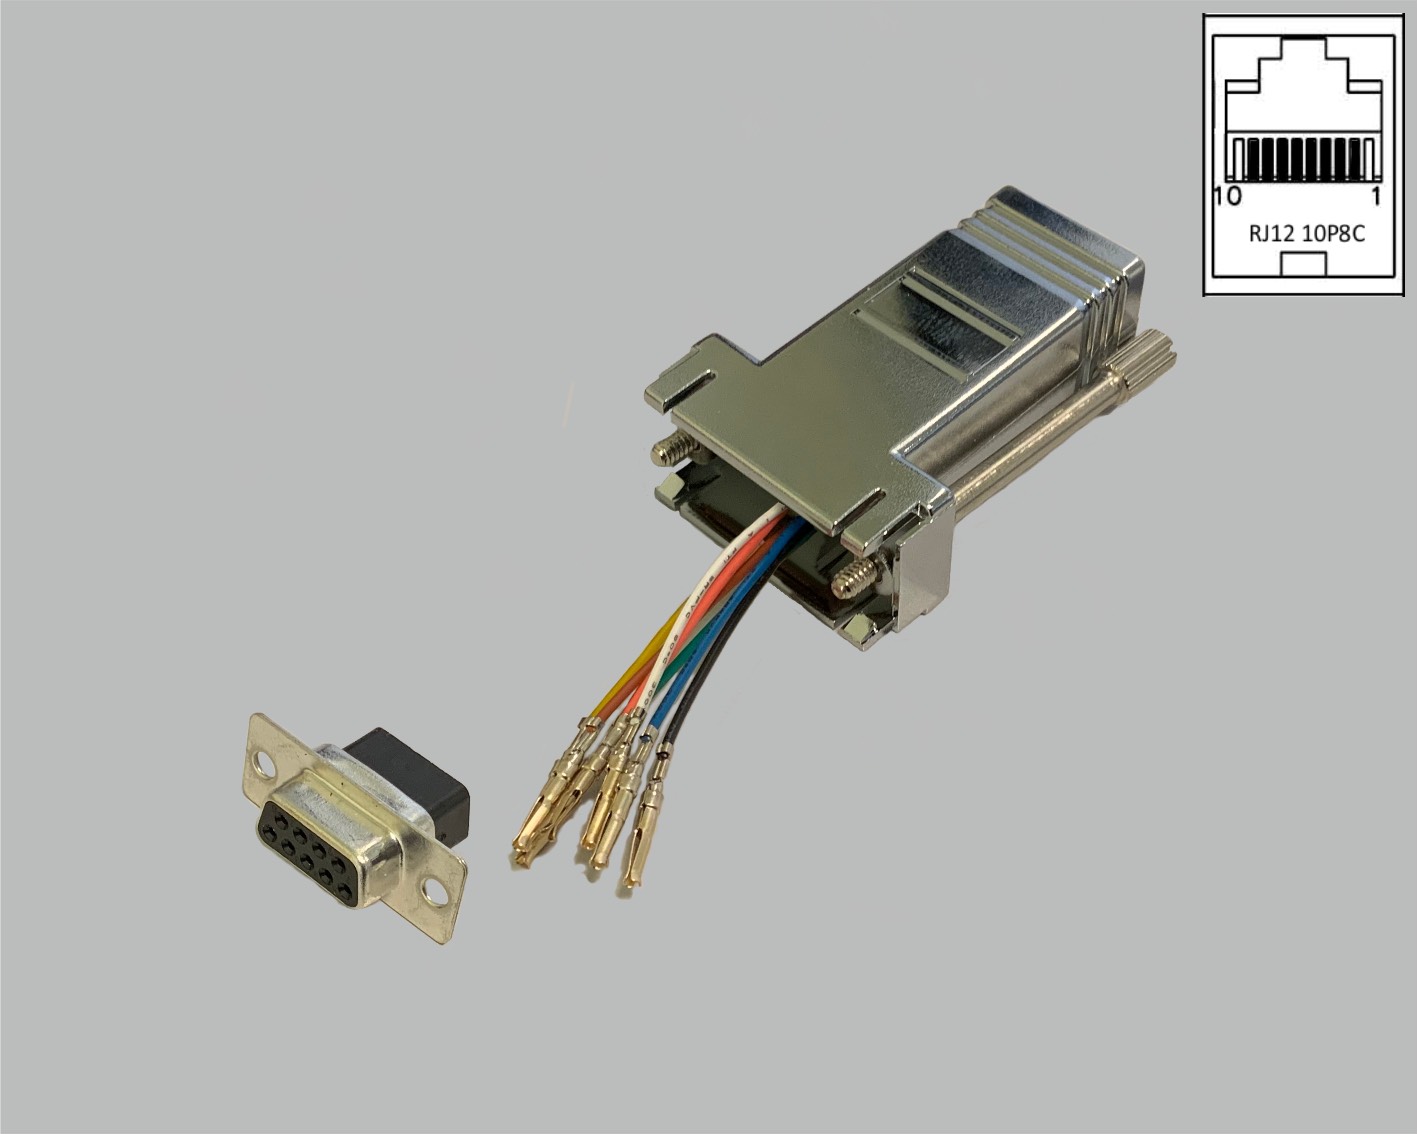 D-Sub/RJ adapter, freely configurable, D-Sub female connector 9-pole to RJ45 (10P8C) female connector, metallised